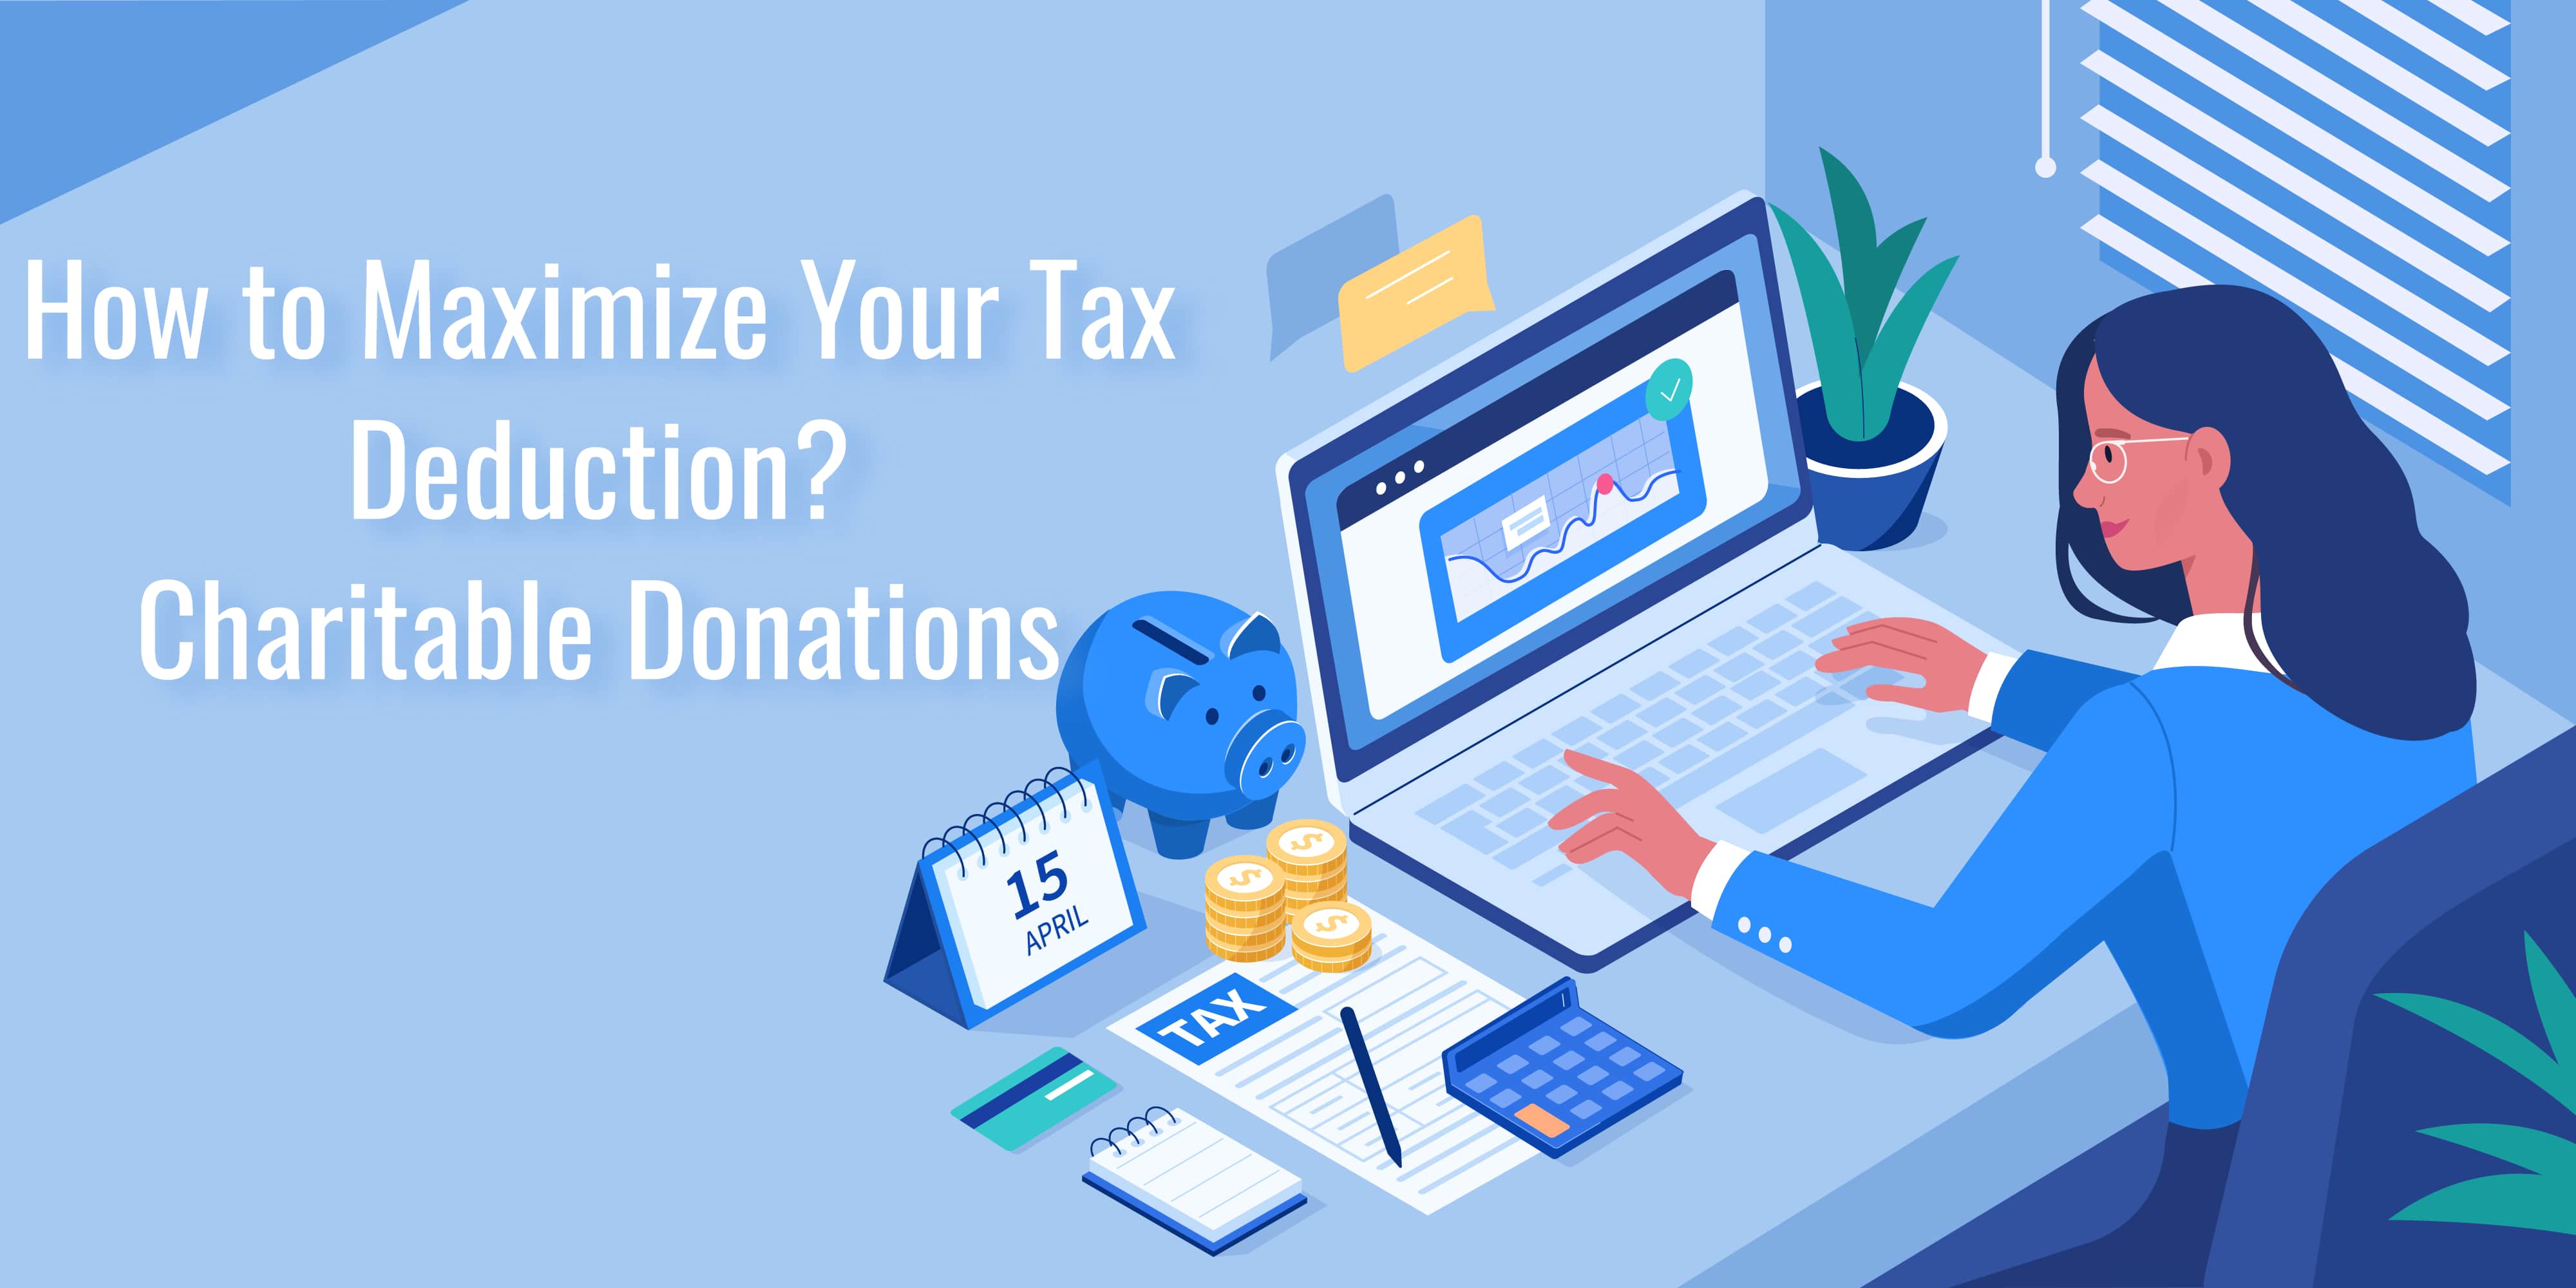 Charitable Donations. Maximize your Tax Deductions.